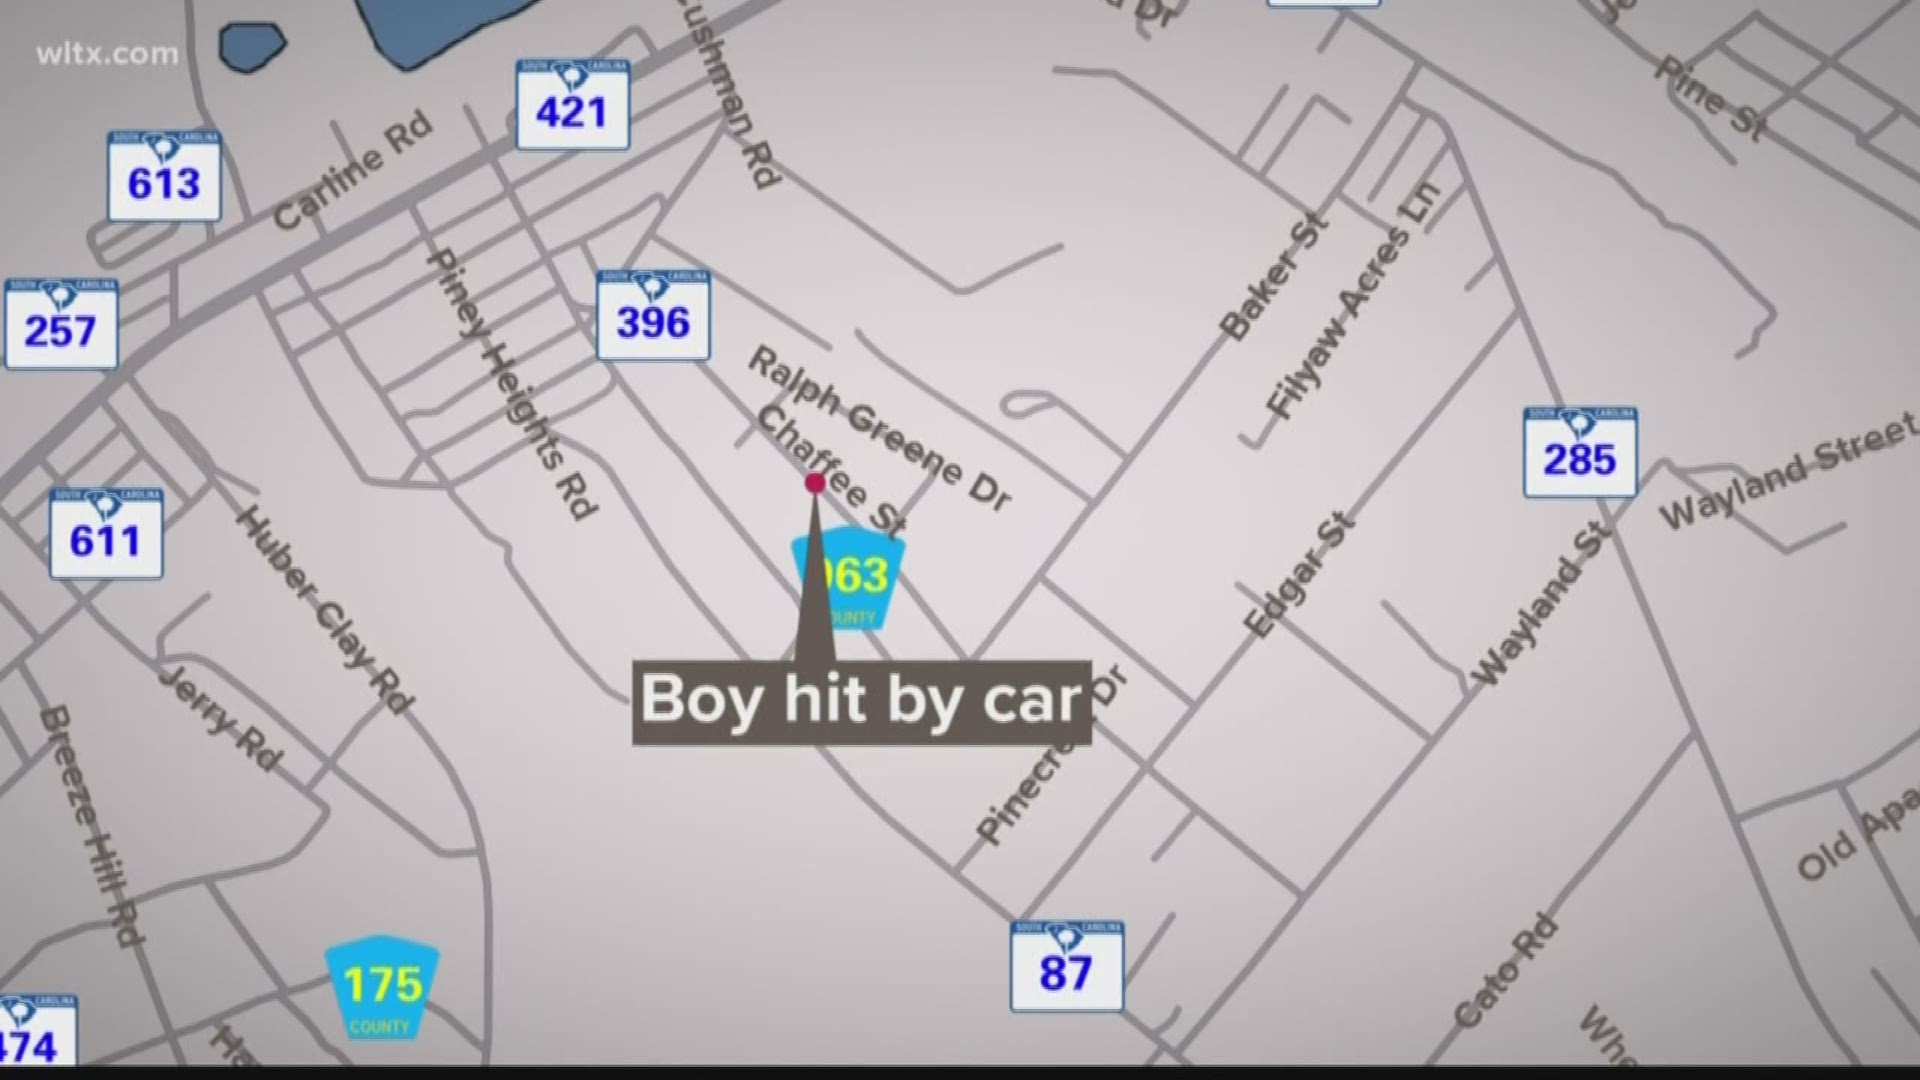 A young boy was killed after being hit by a car while riding his bike in Aiken County.